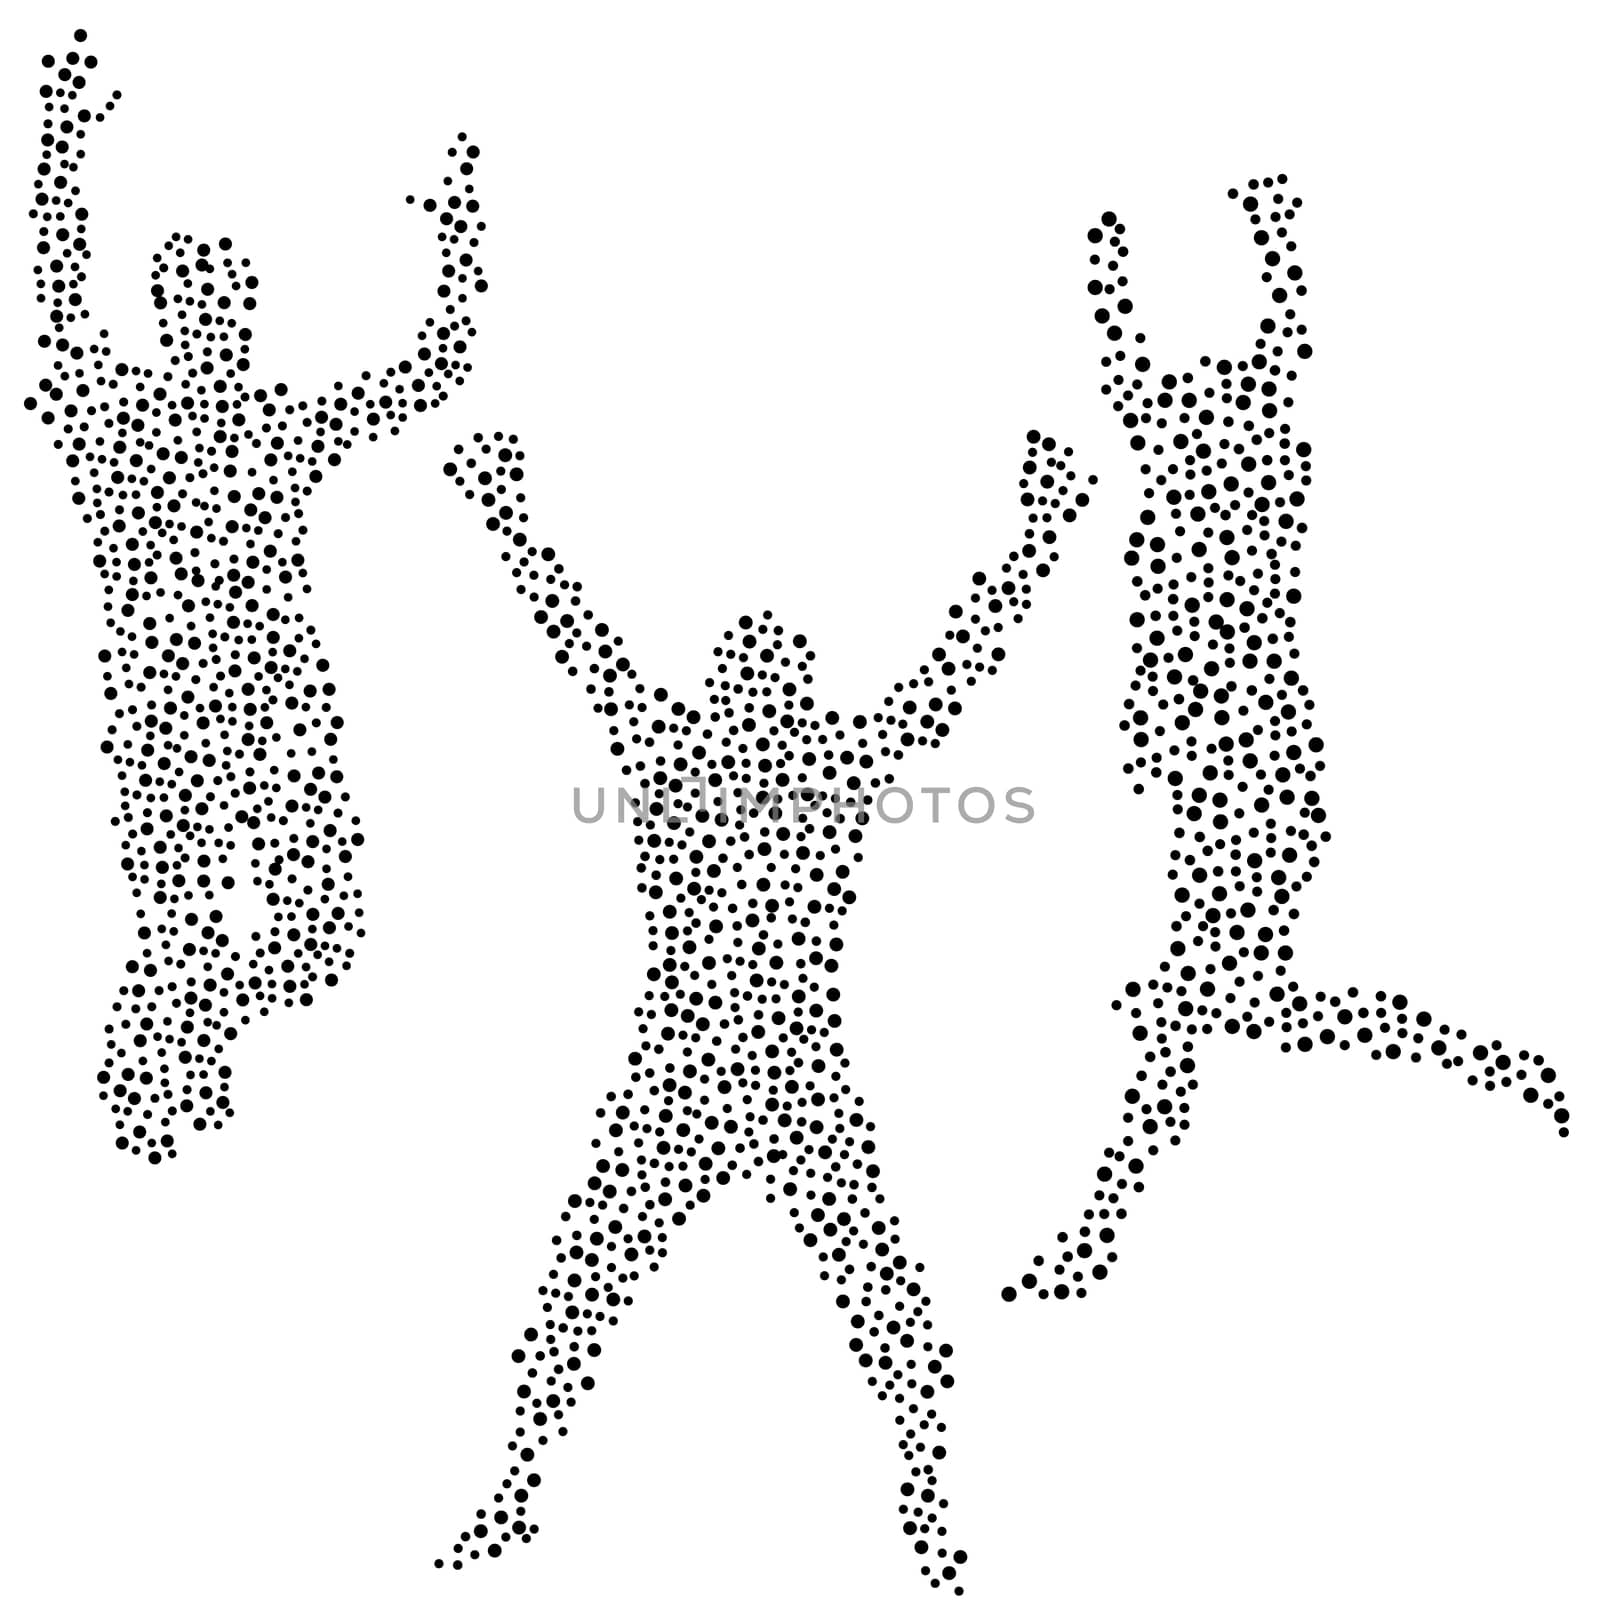 Dots silhouettes of men jumping by hibrida13